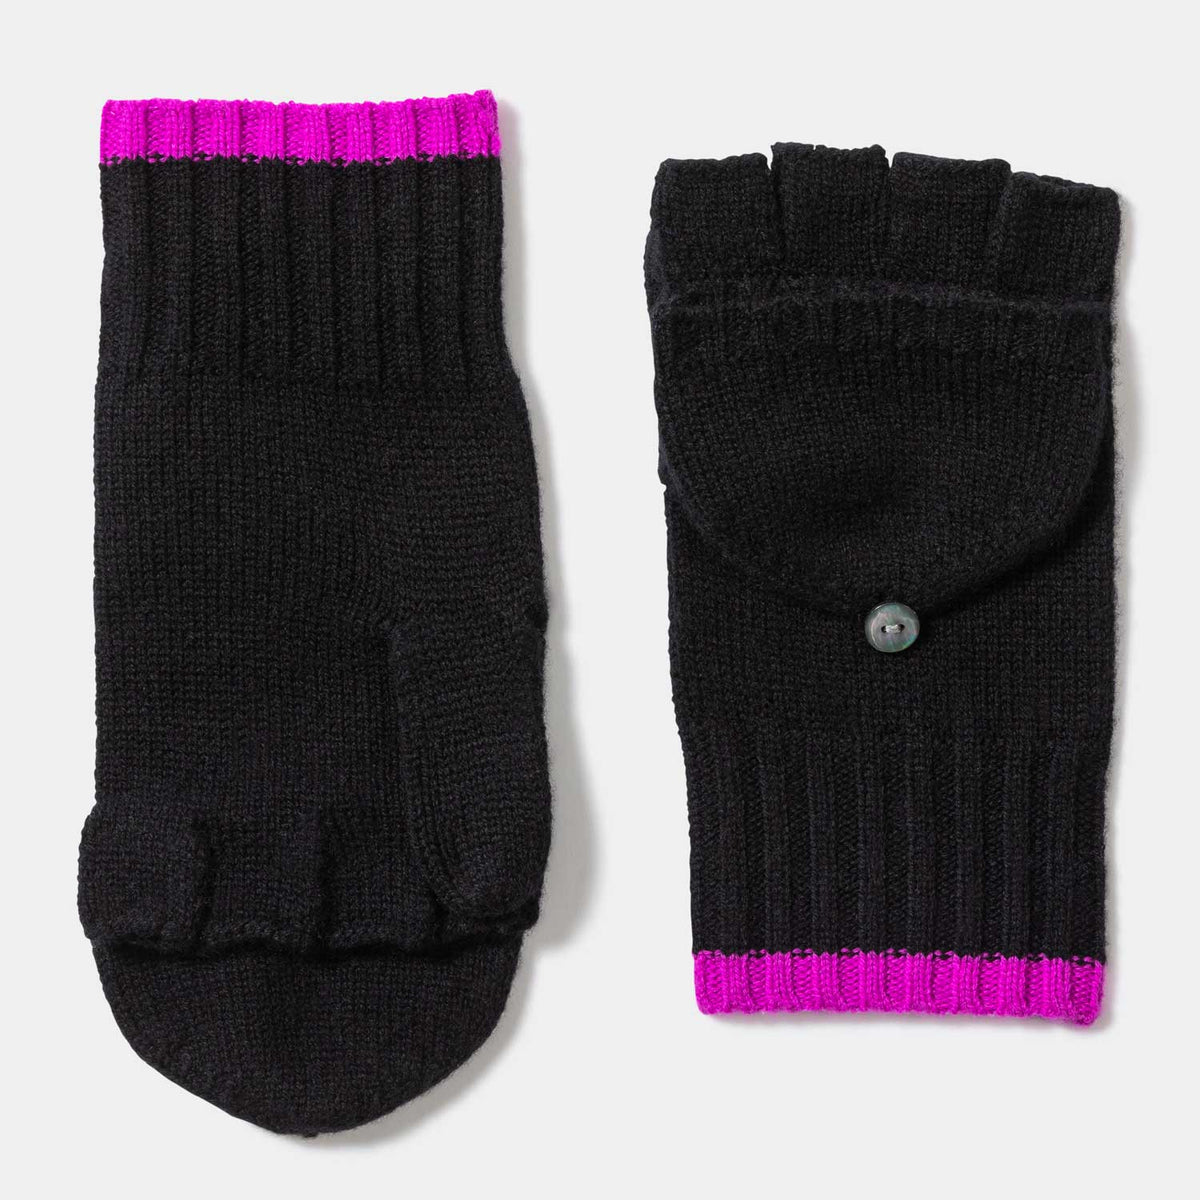 Picture of knit cashmere pop top glove, contrast color at cuff, black with magenta.